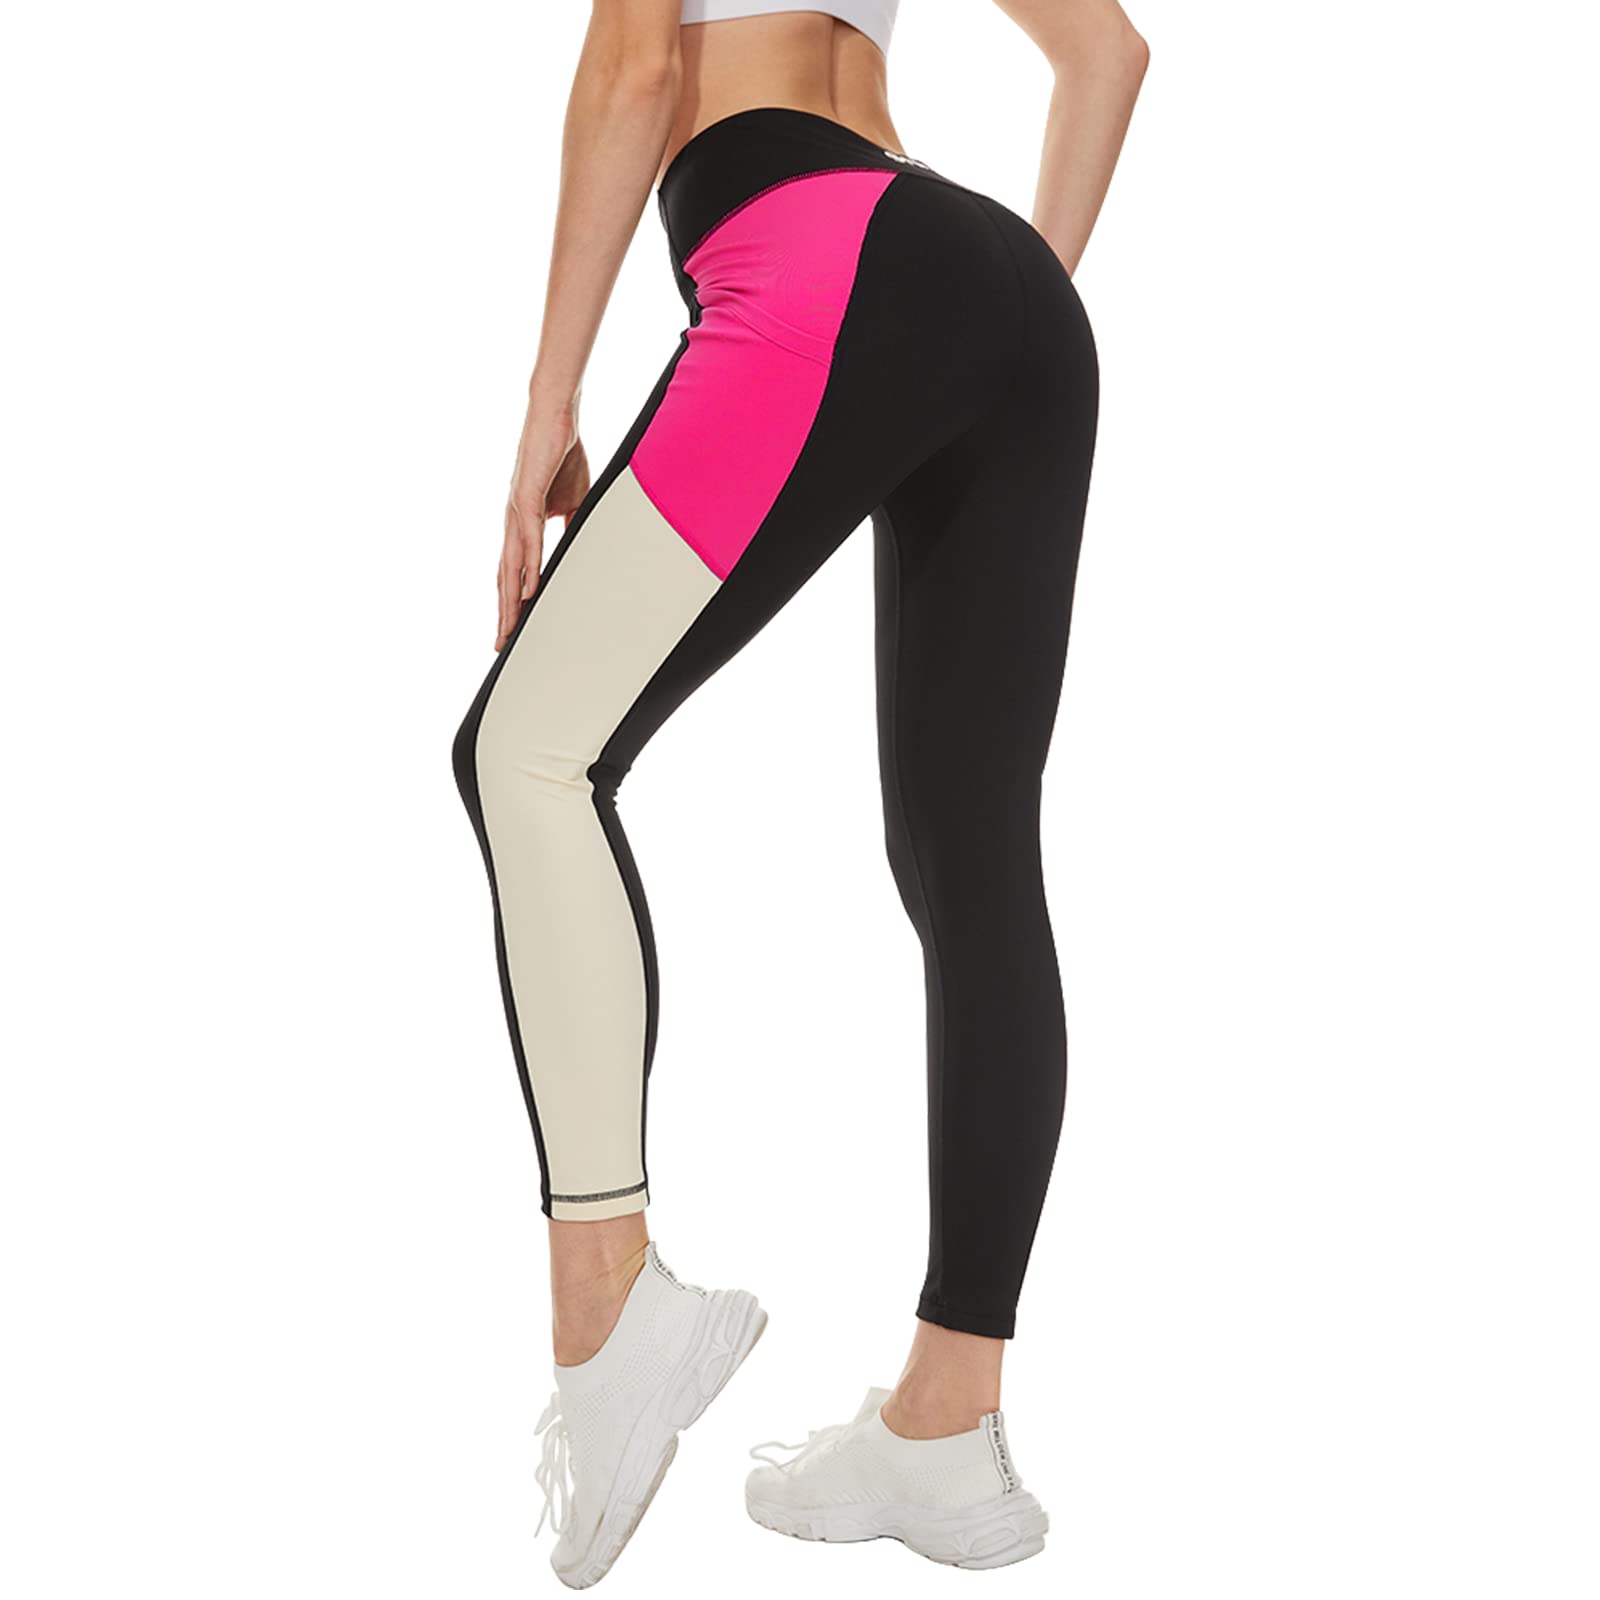 Fhine Womens Yoga Leggings with Pockets-High Waist Workout Pants 7/8 Length  Stretch Running Jogging Hiking Cycling Activewear Small 25in Rosy Pannel